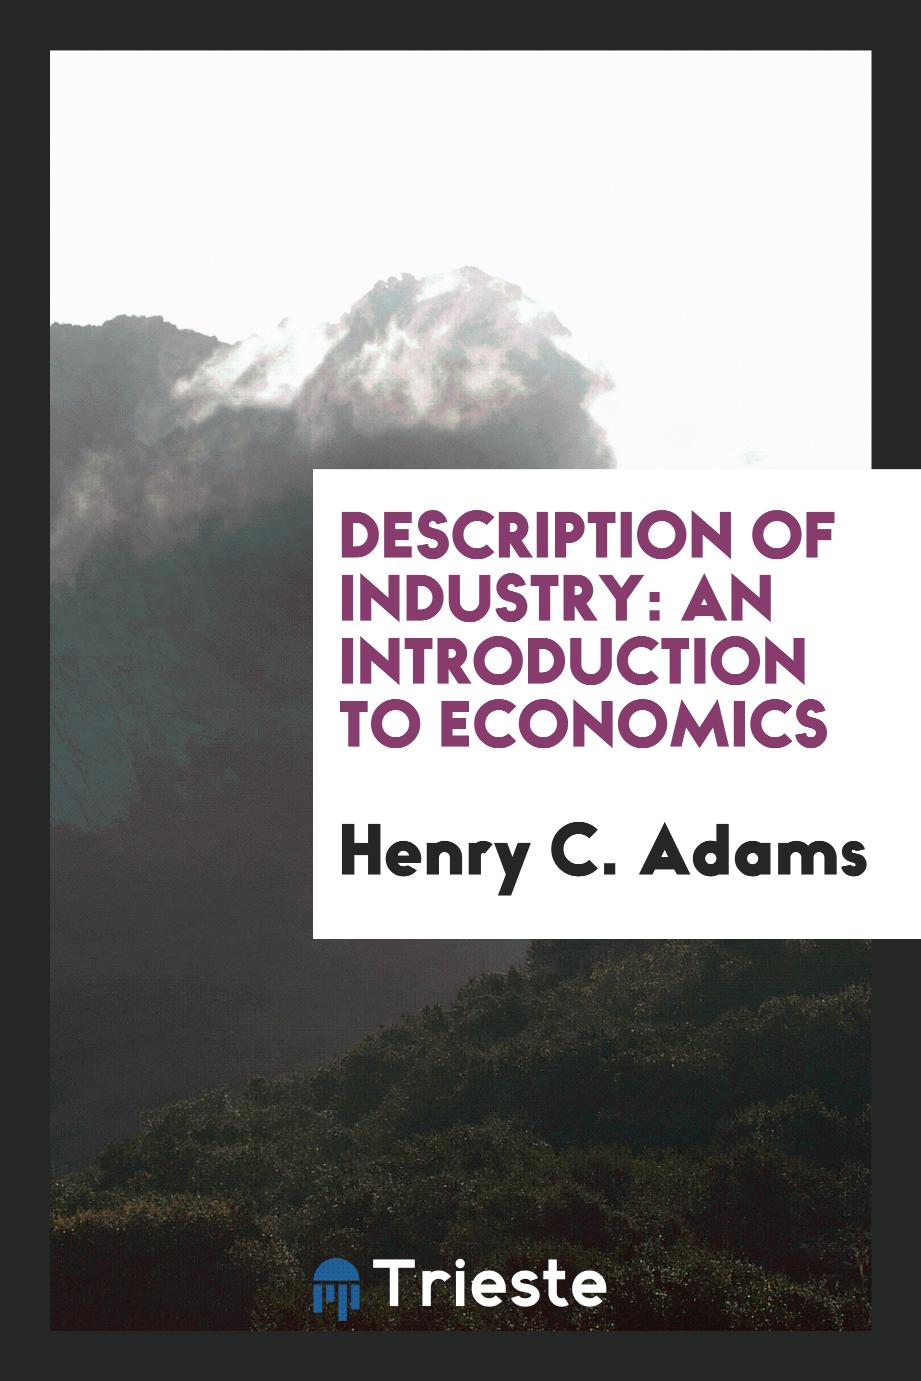 Henry C. Adams - Description of industry: an introduction to economics